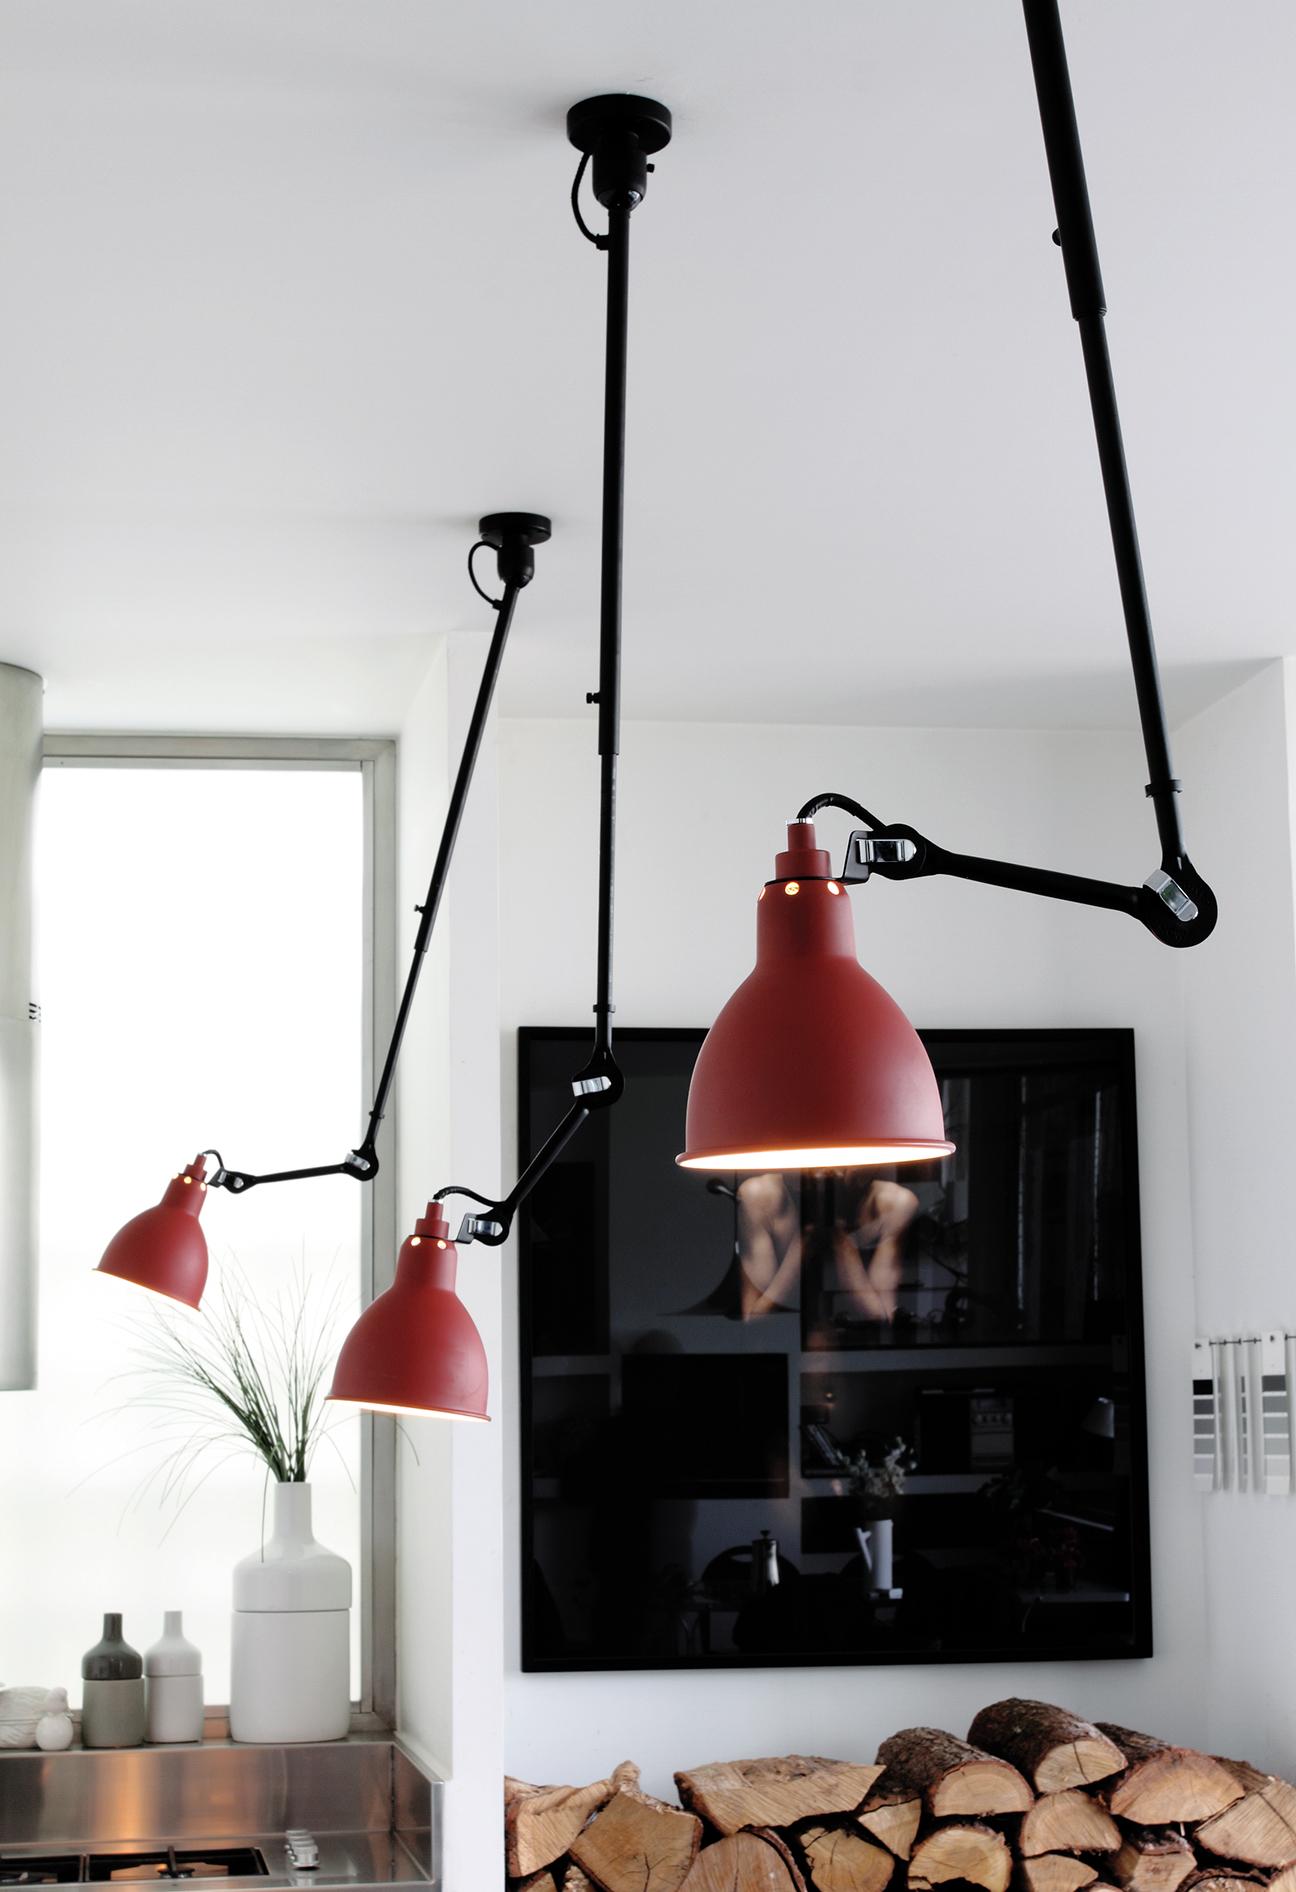 Steel DCW Editions La Lampe Gras N°302 Pendant Light in Black Arm and Red Shade For Sale